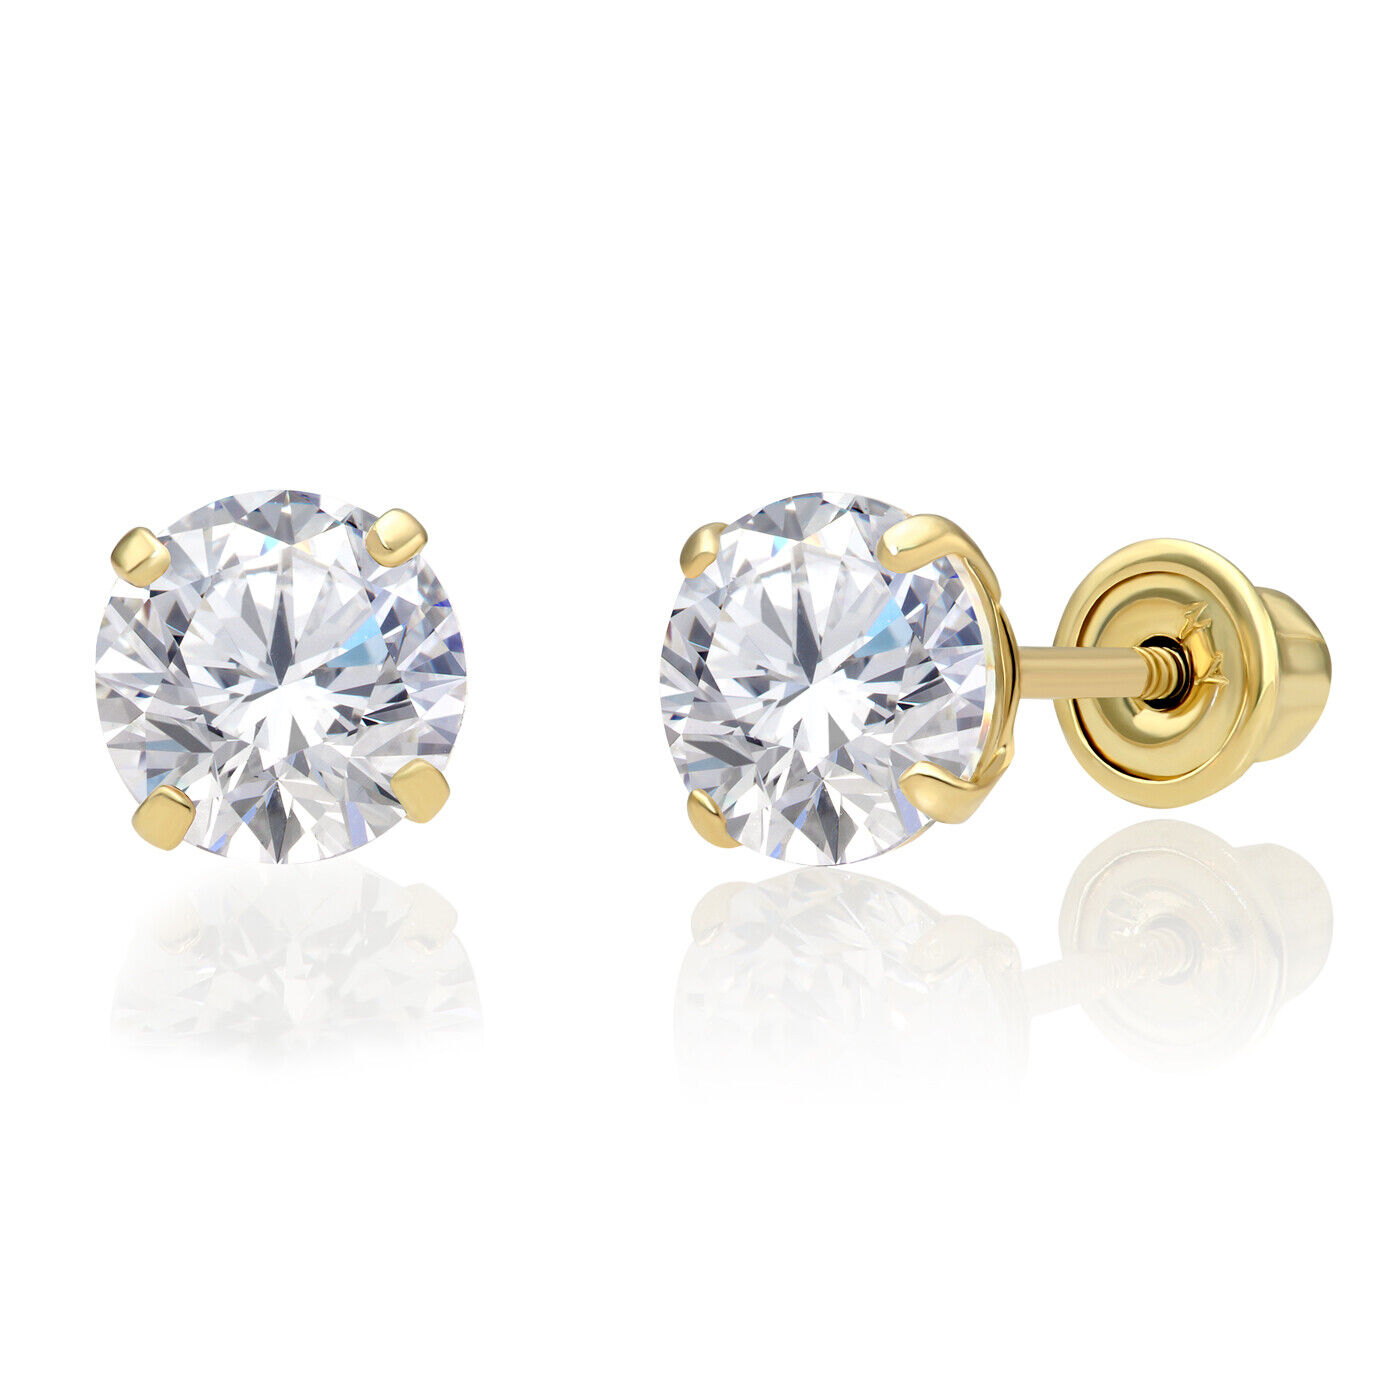 10K Real Solid Gold Solitaire Round CZ Sleeper Studs Earrings Screw-back 2mm-8mm